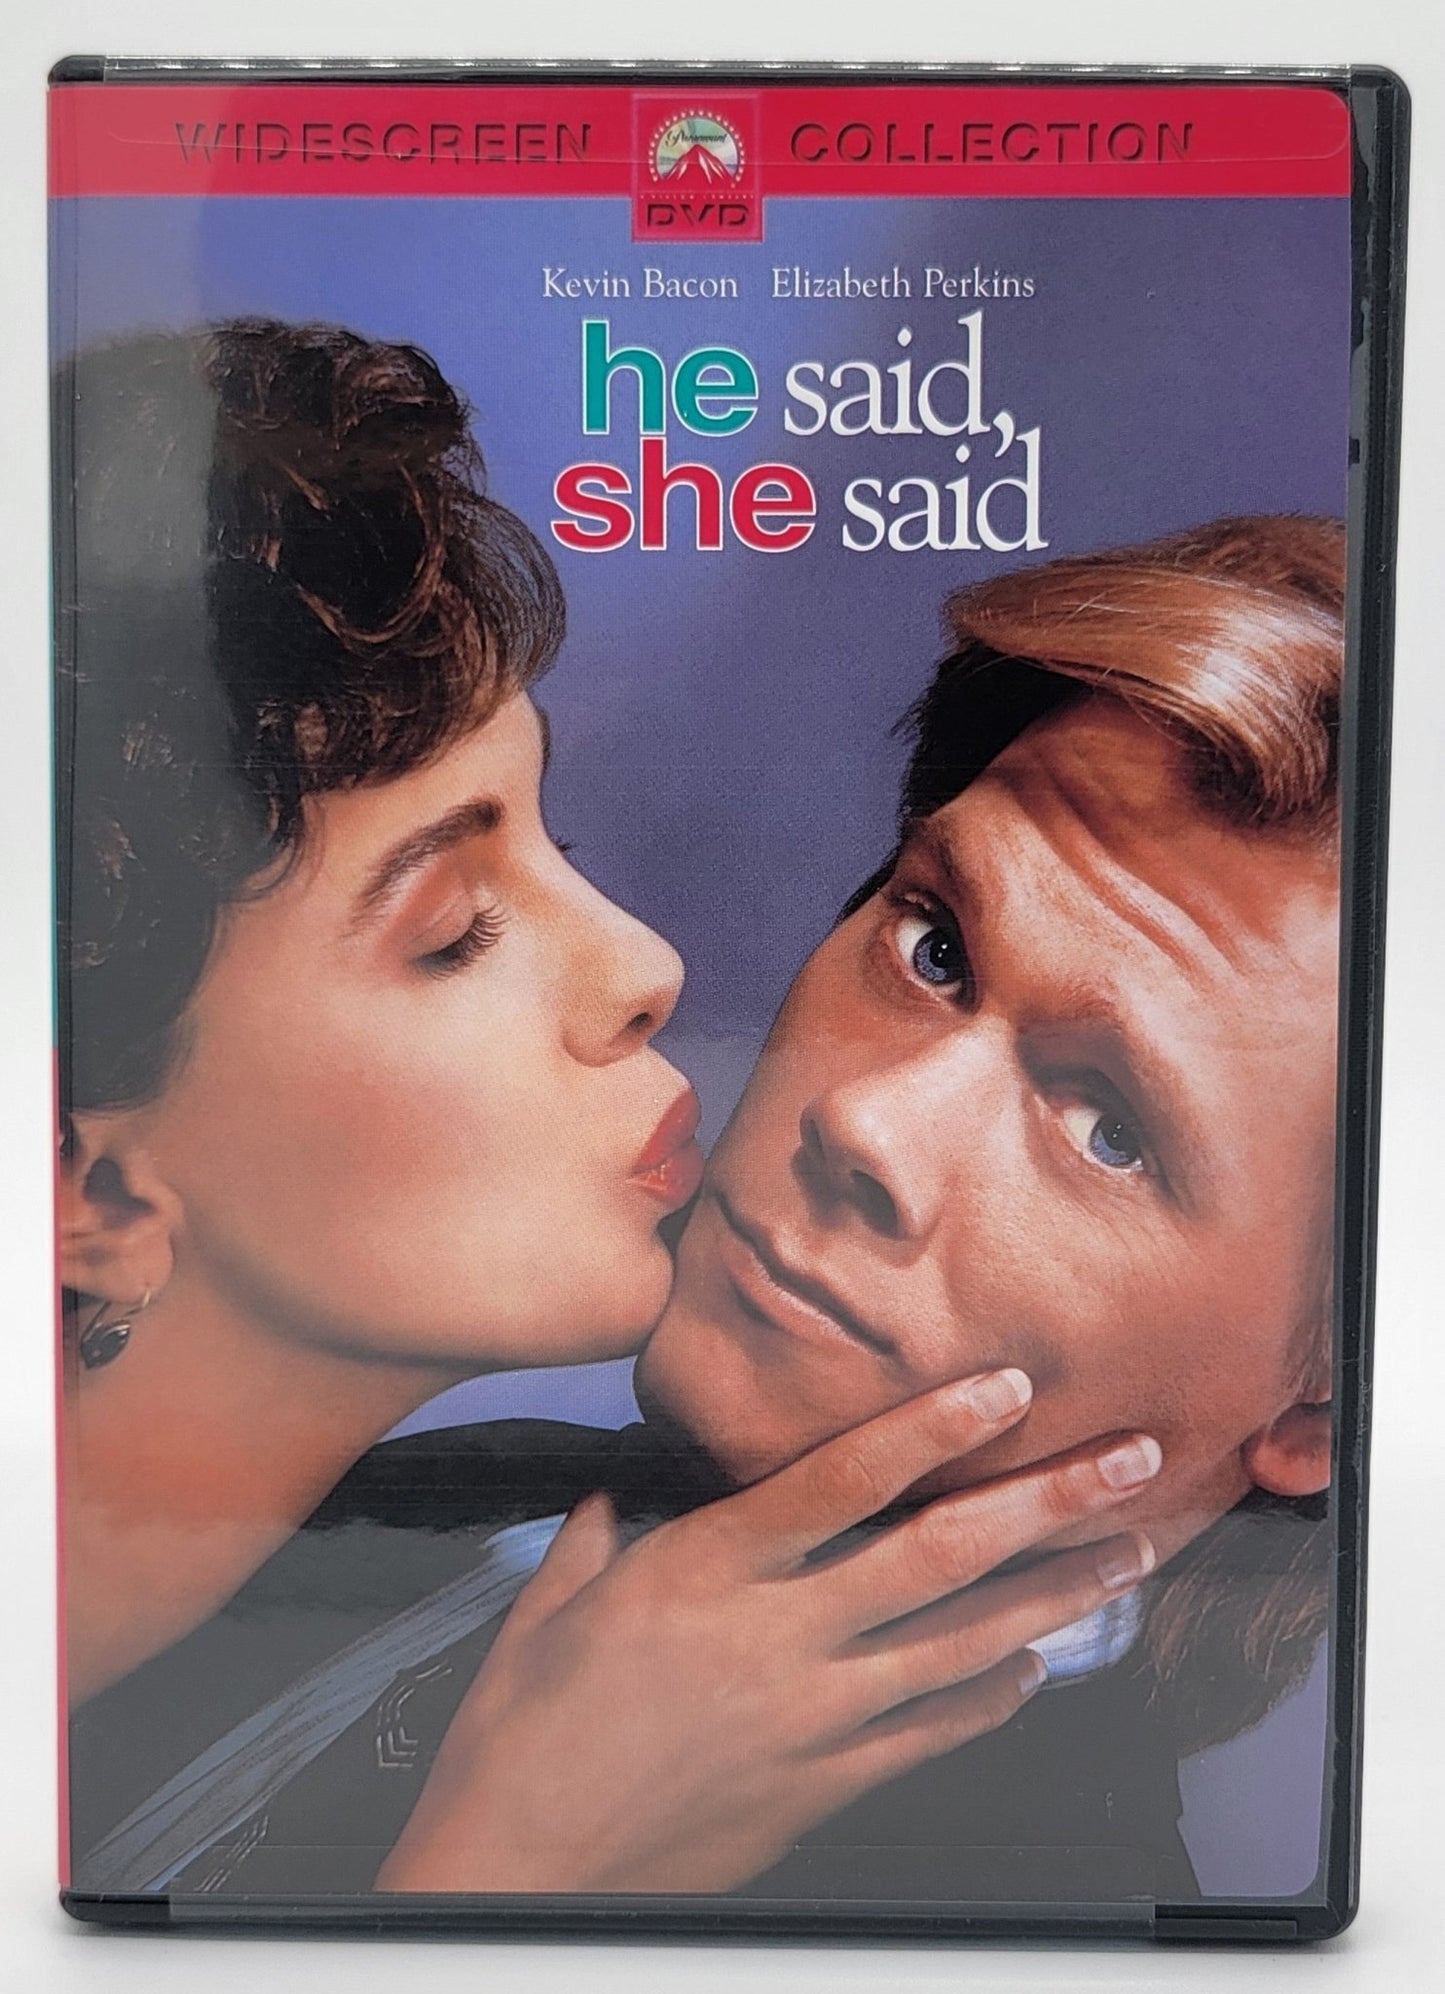 Paramount Pictures Home Entertainment - He said, she said | DVD | Widescreen - DVD - Steady Bunny Shop